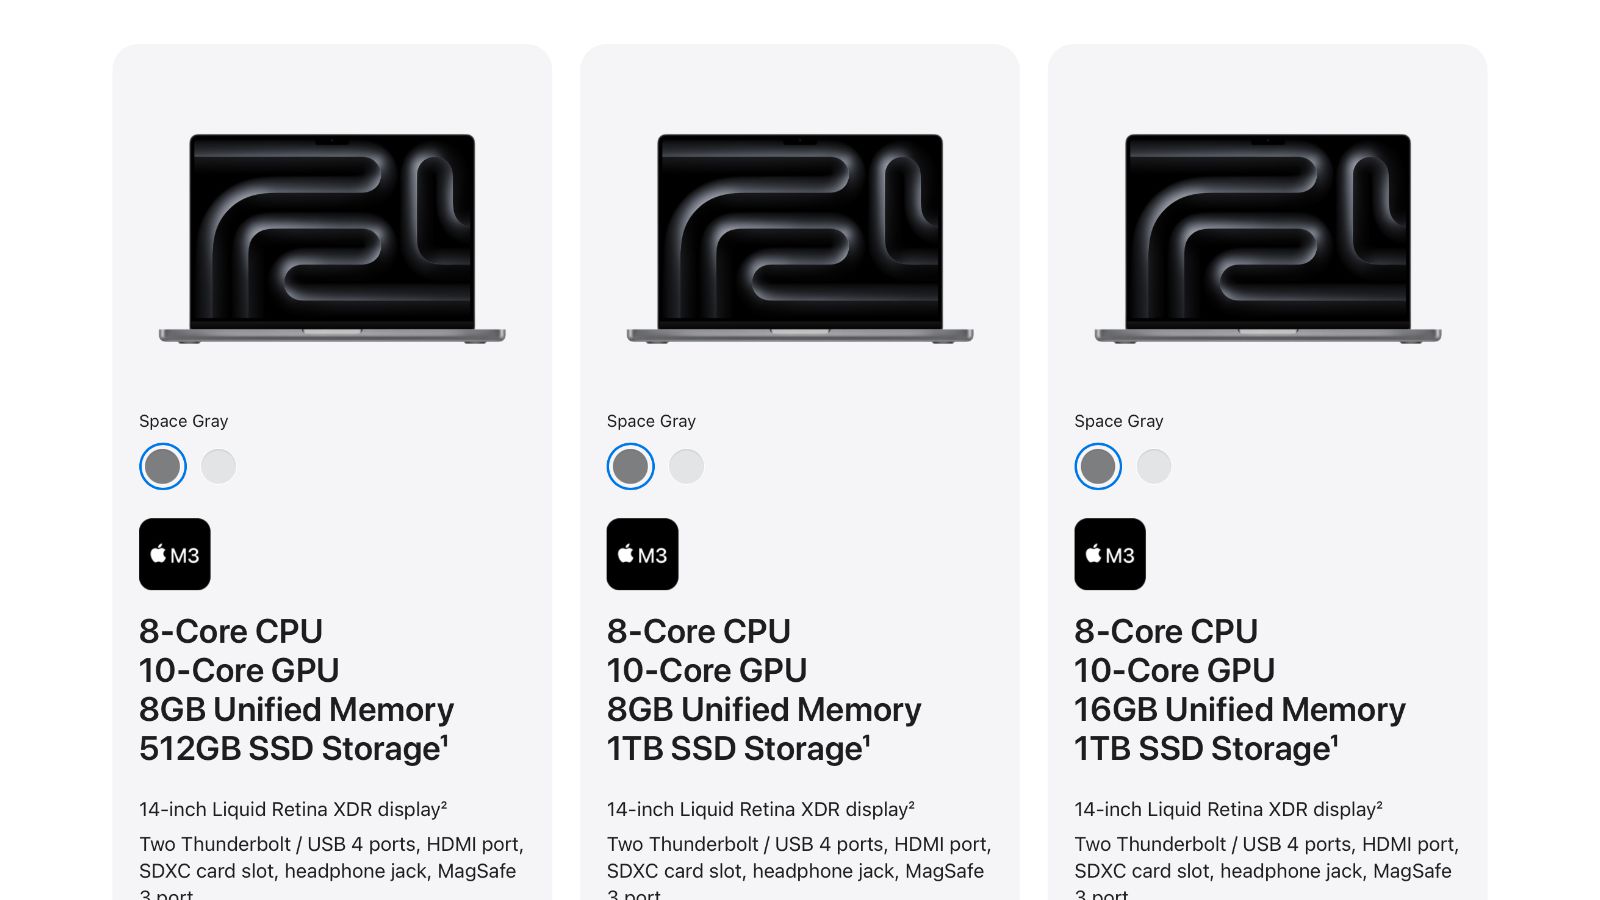 
The configuration, spotted by French website Consomac, is now highlighted as a standard option on Apple's website for $1,999. While the configuratio